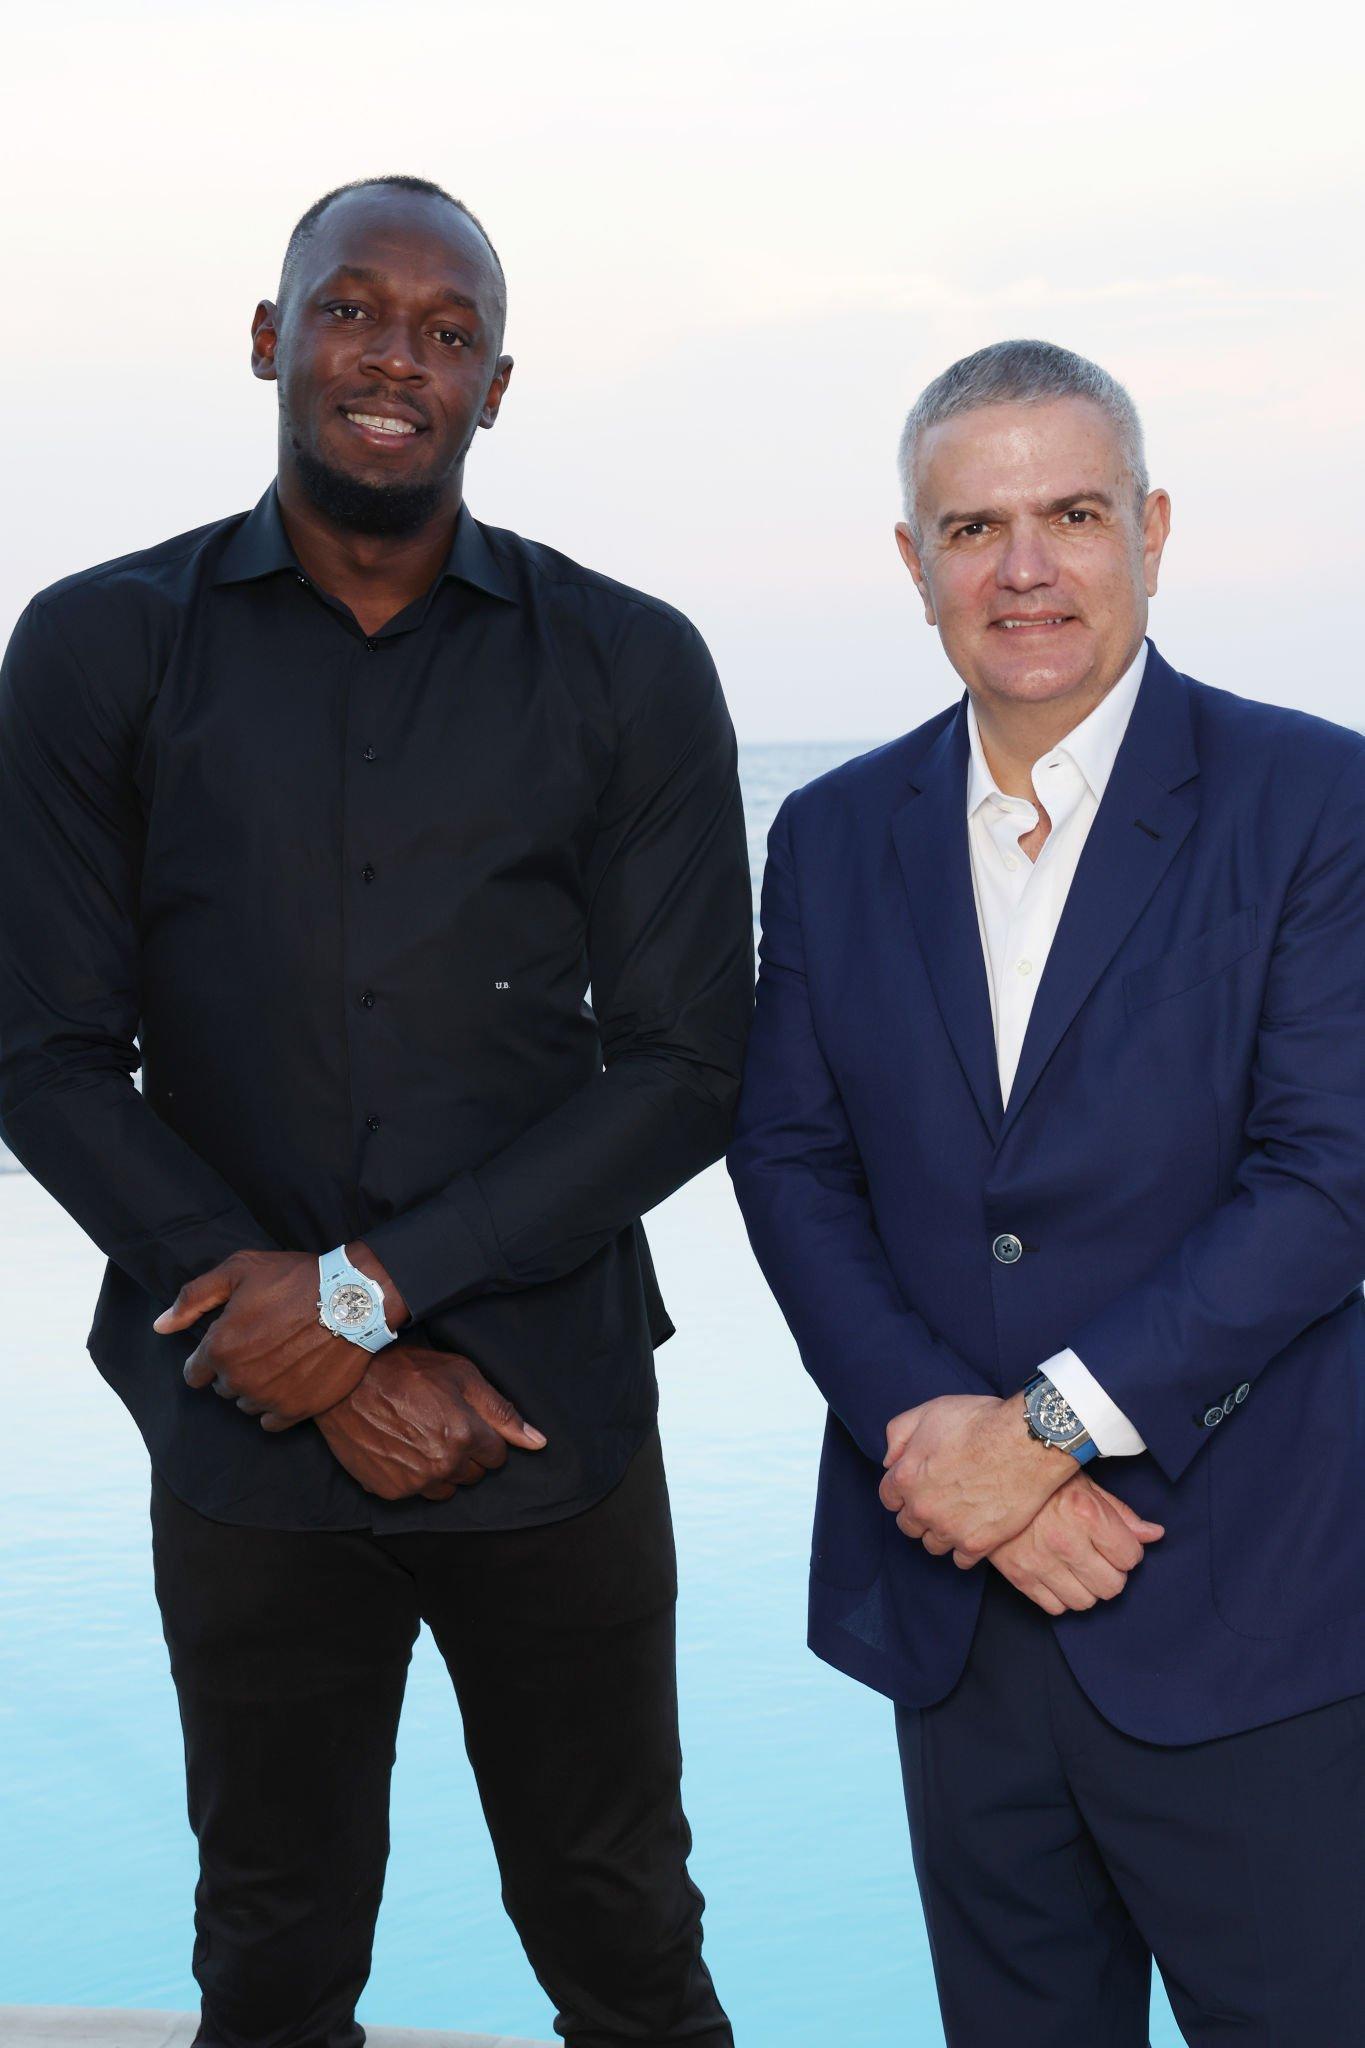 Usain Bolt, the legendary Jamaican sprinter, is not only known for his lightning-fast speed on the track but also for his impeccable sense of style. Recently, he made headlines in the world of fashion and horology by sporting the new Hublot Big Bang Unico "Sky Blue." This exquisite timepiece showcases the perfect blend of athleticism and luxury.